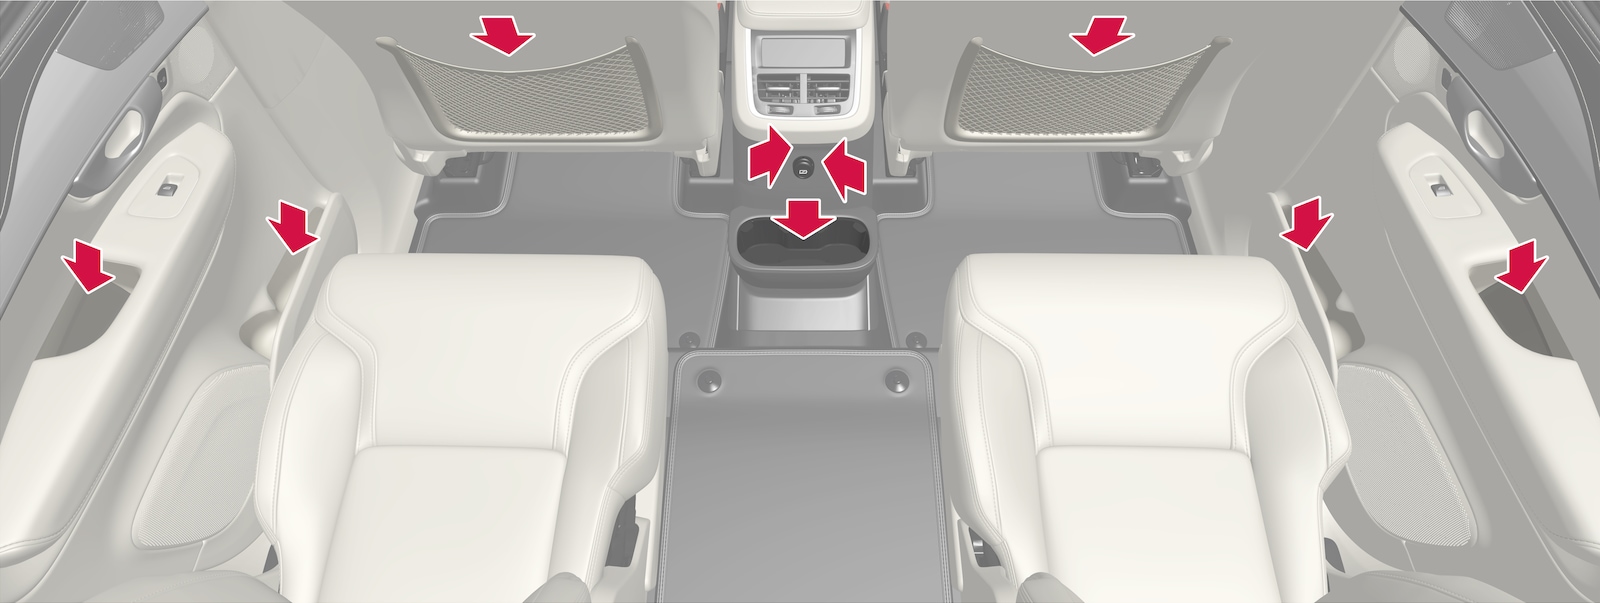 P5-2017–Interior–Overview second seat row and tunnel console - 6 seats car